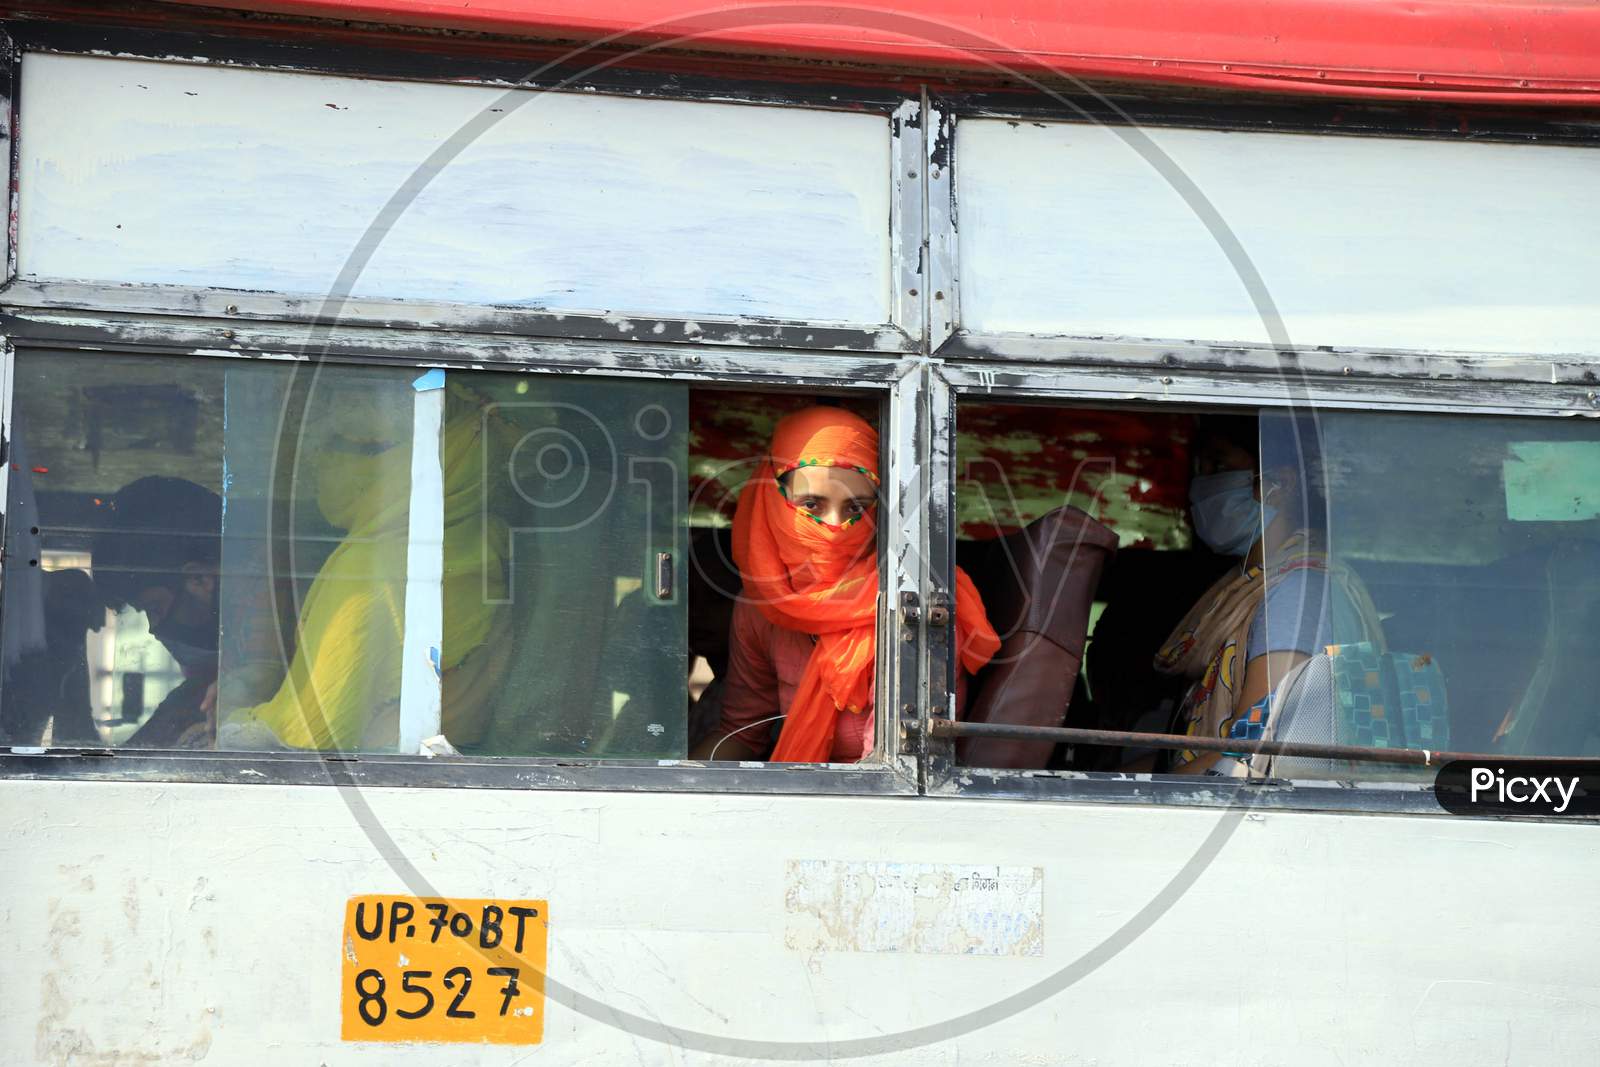 Students who had been stranded in Prayagraj for more than a month, due to the lockdown taken as a preventive measure to curb the spread of novel coronavirus, board a specially arranged bus to reach their respective hometown on April 29, 2020.